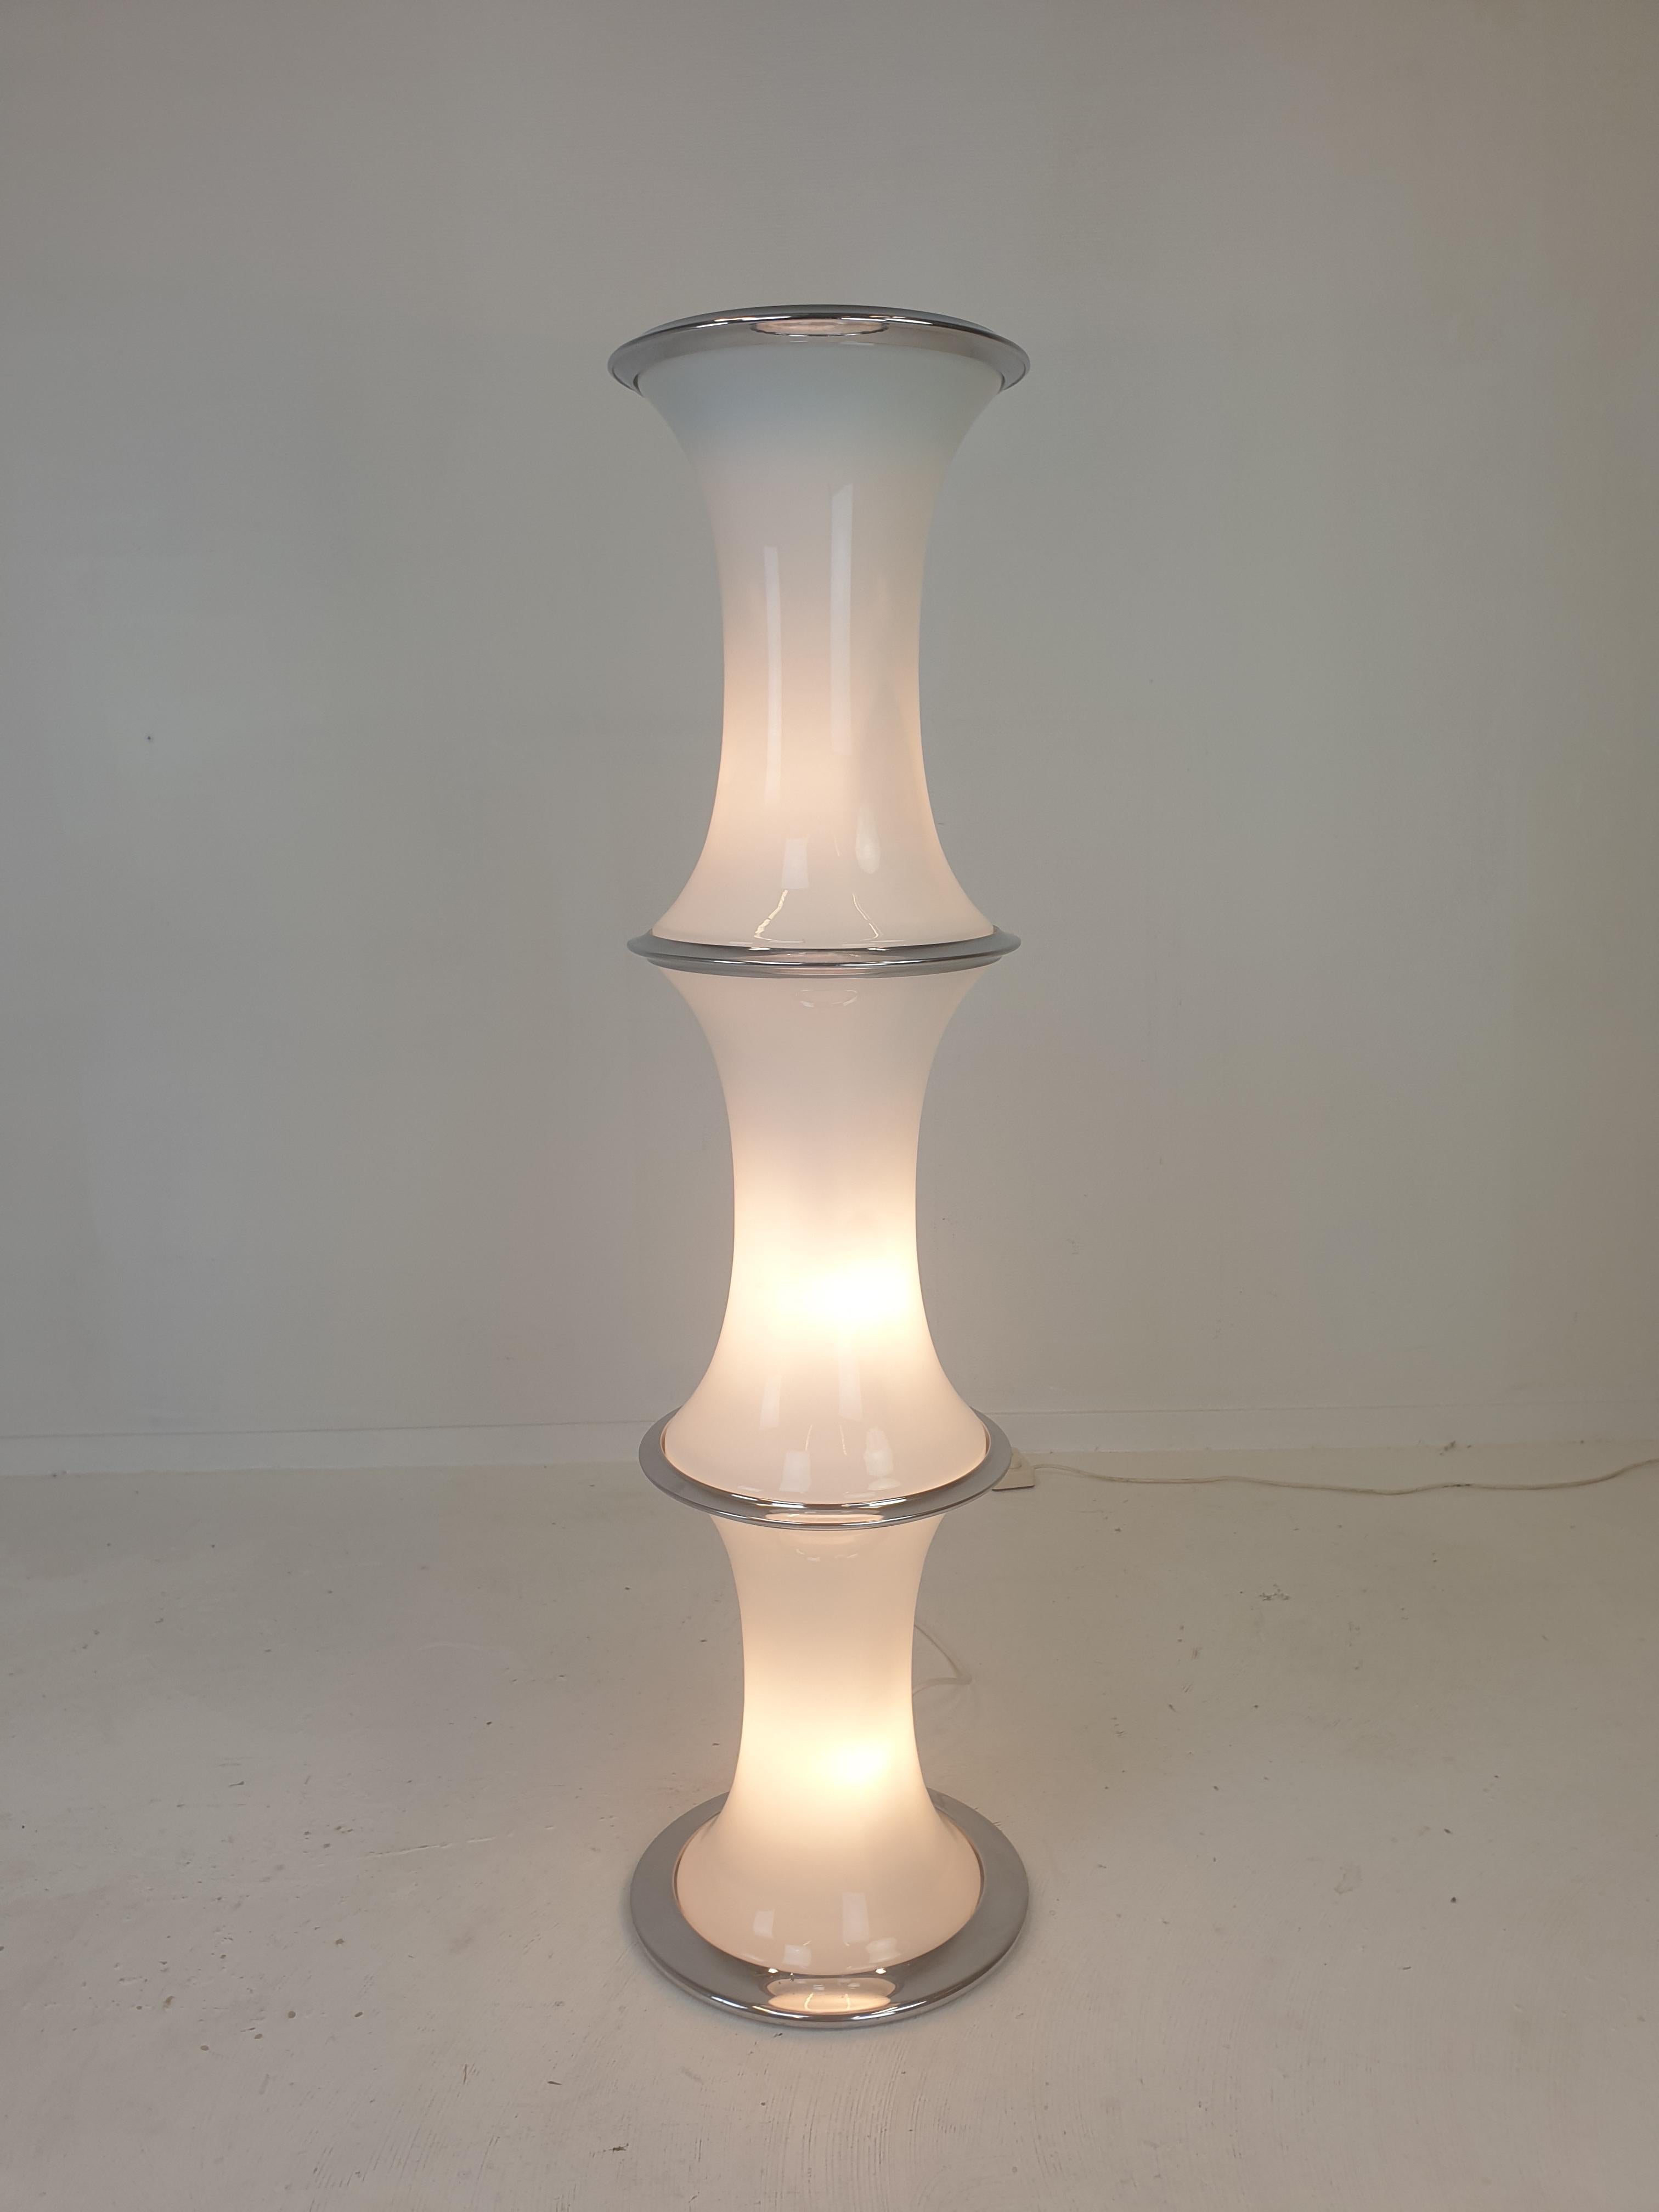 Hand-Crafted Bamboo Floor Lamp by Enrico Tronconi for Vistosi, 1970's For Sale